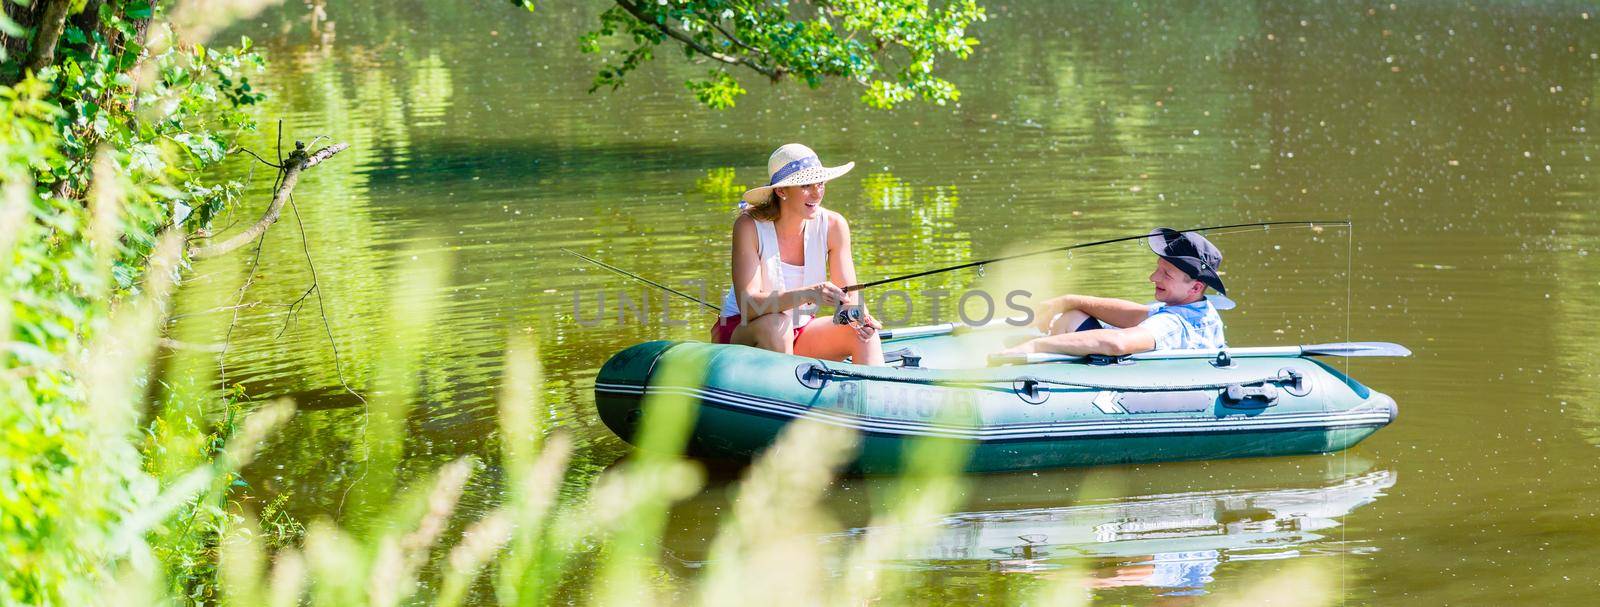 Couple in boat on pond or lake fishing, woman with angle and man is steering